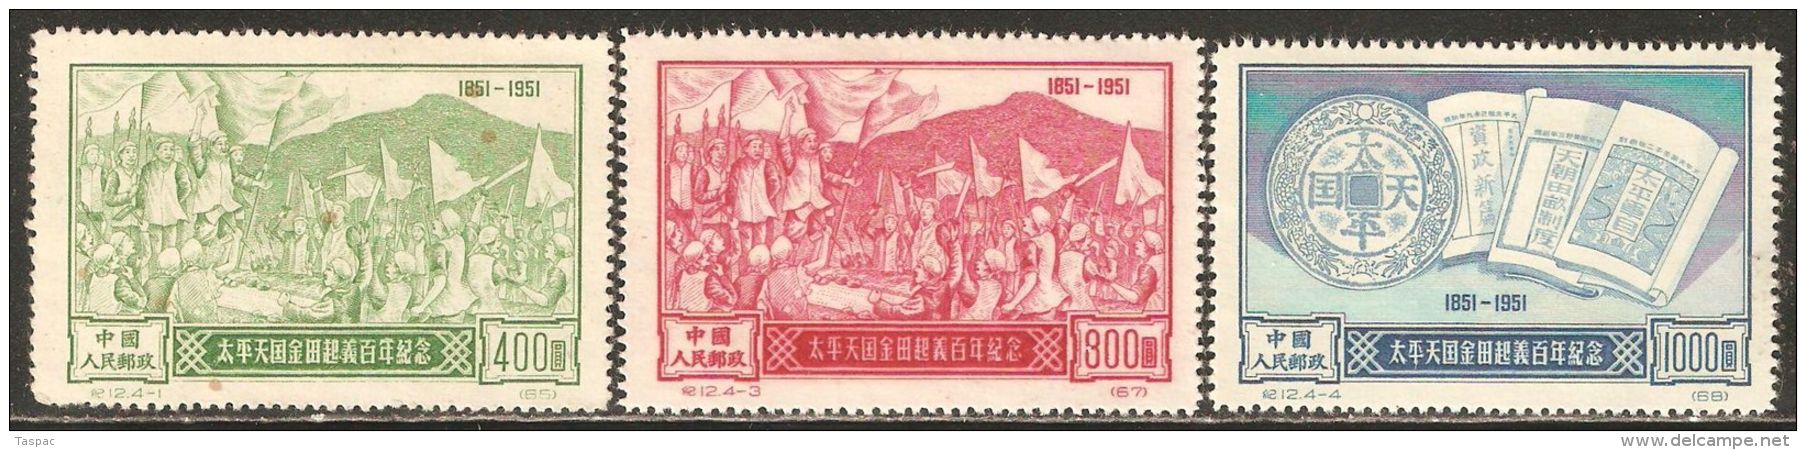 China P.R. 1951 Mi# 129-130, 132 II (*) Mint No Gum, Hinged - Reprints - Short Set - Cent. Of Taiping Peasant Rebell - Offizielle Neudrucke